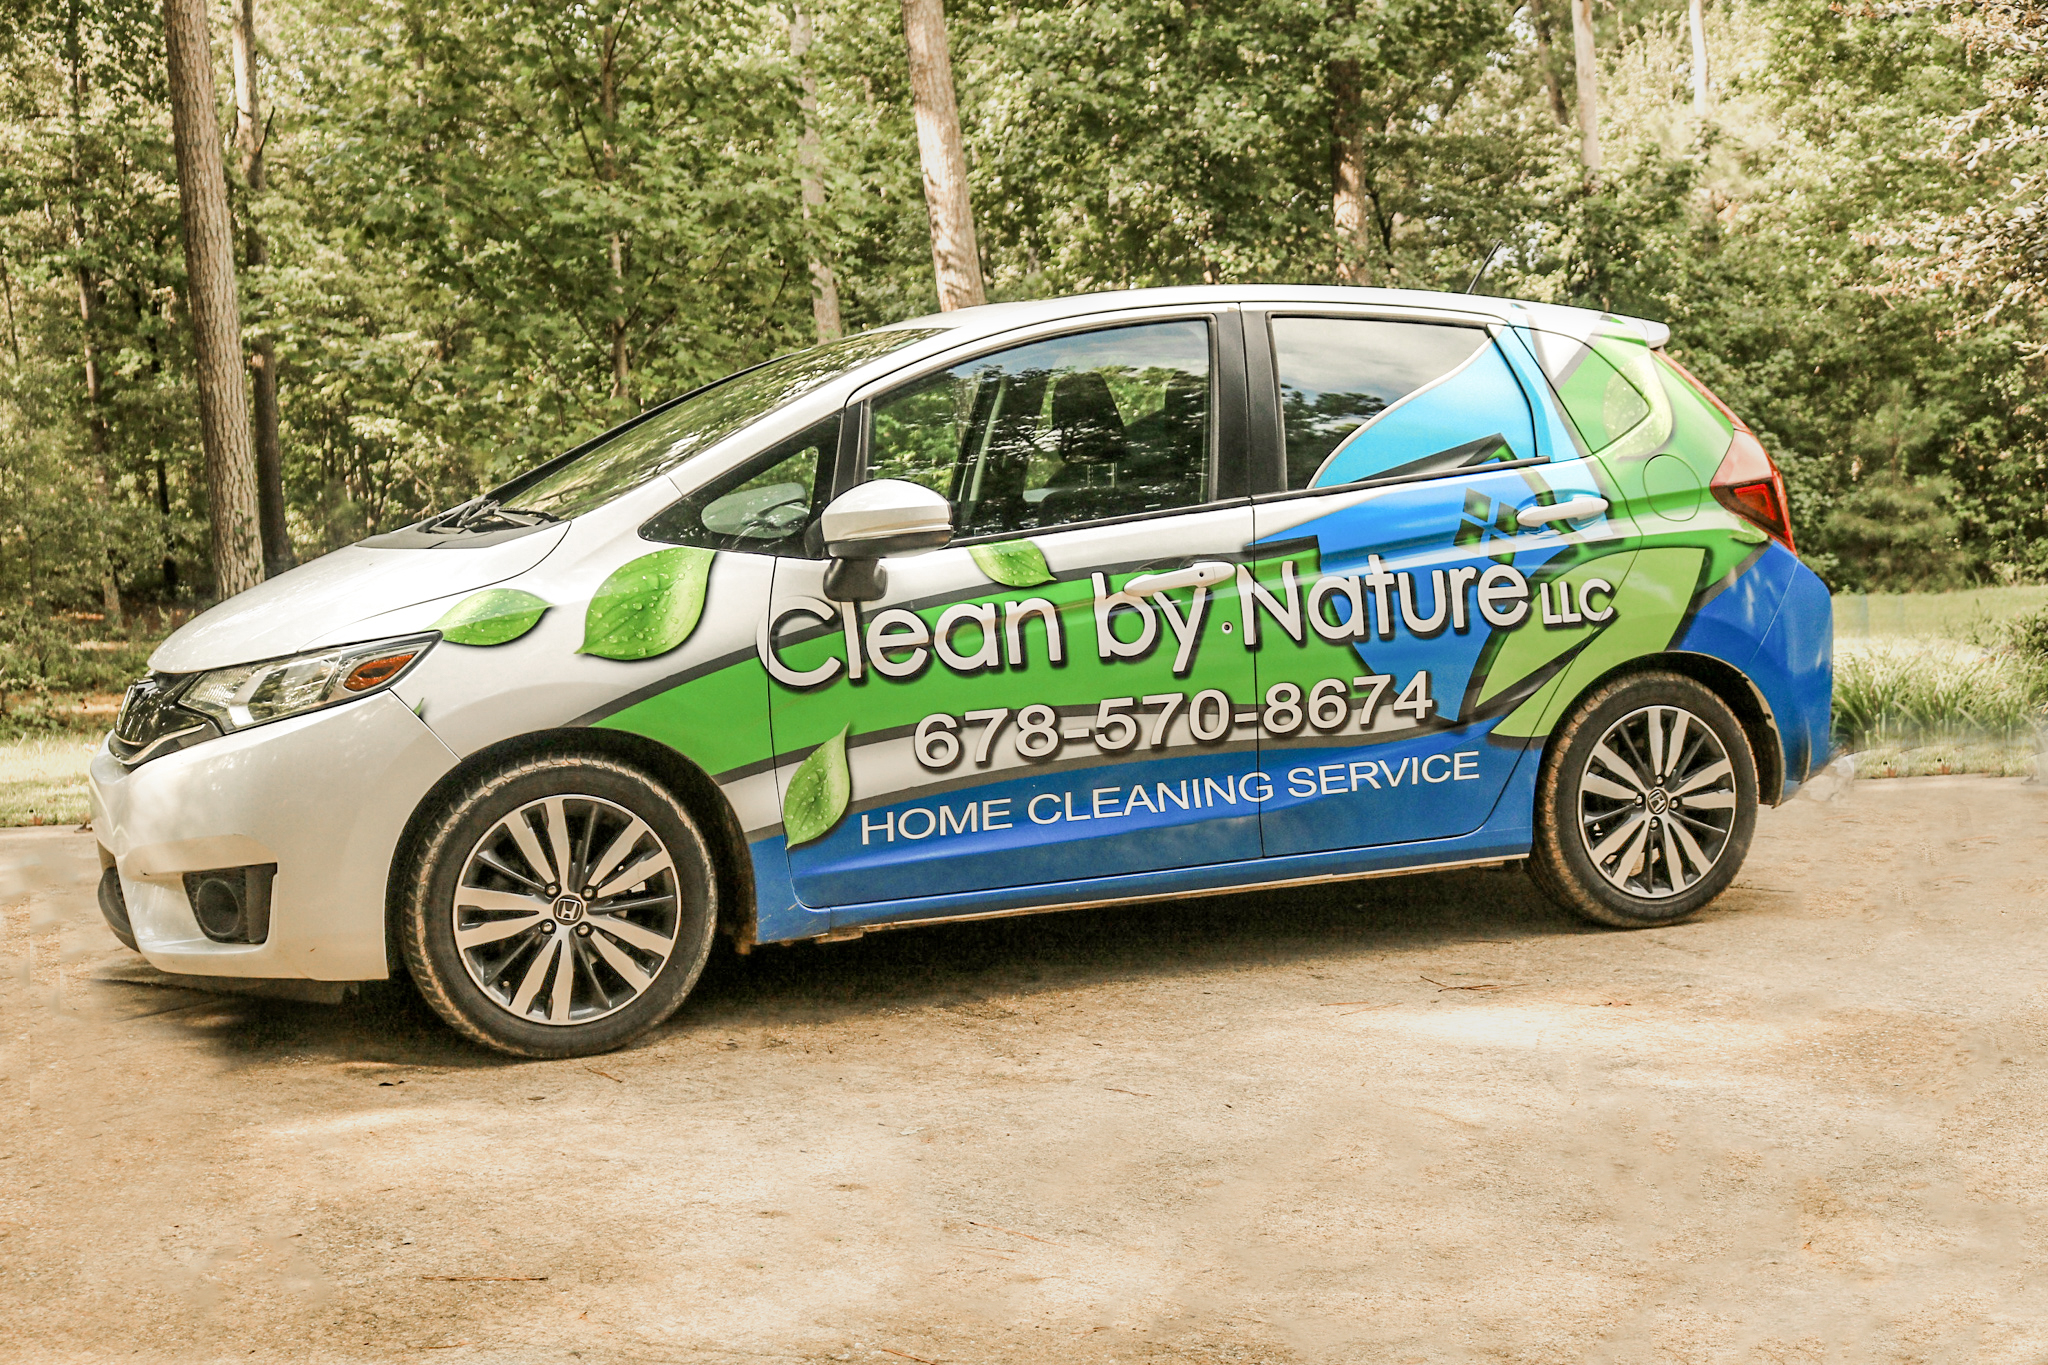 The Clean by Nature house cleaning mobile